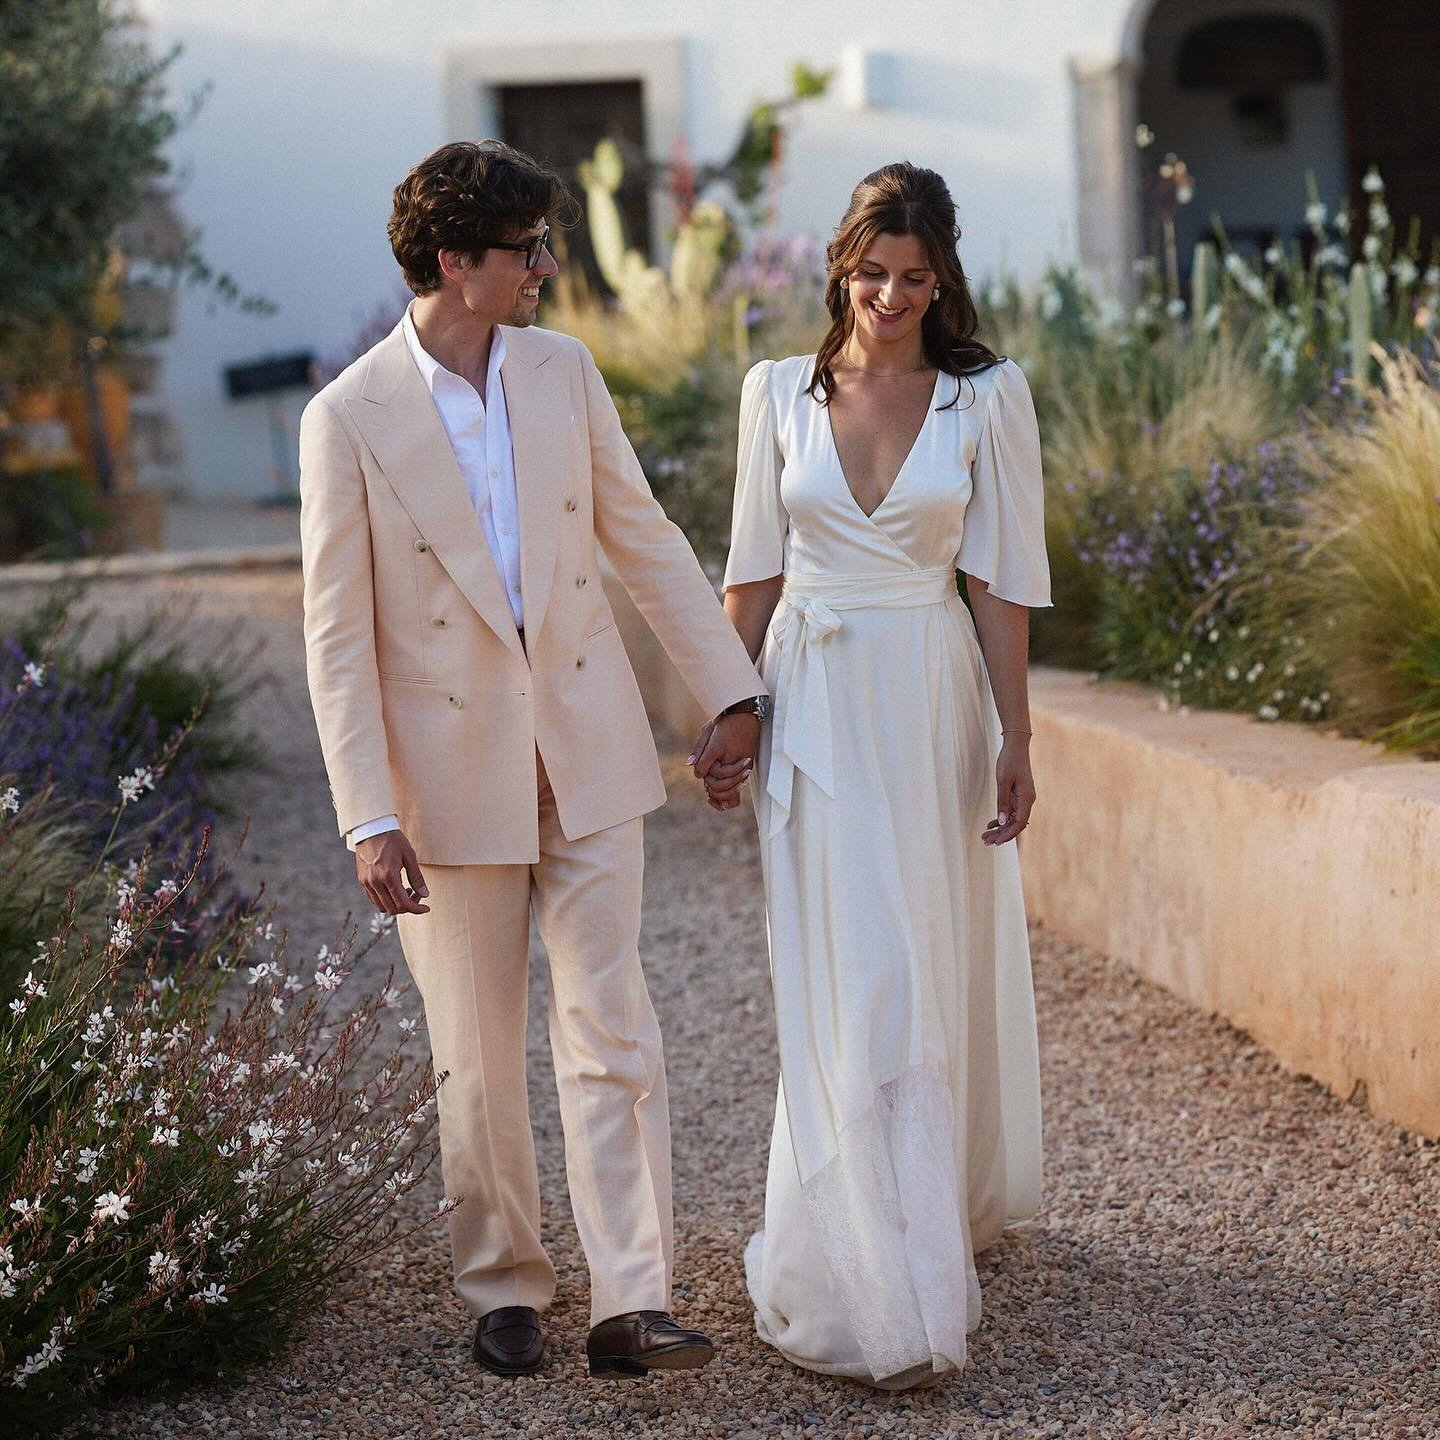 Elien &amp; Tim&rsquo;s wedding at the beautiful Junto House, nestled in the idyllic northwest of Ibiza, was all very elegant and a lot of fun! Thank you for letting me be a part of it. @elienweytjens @timmichaelbaert 

Venue @juntos.house st
Flowers